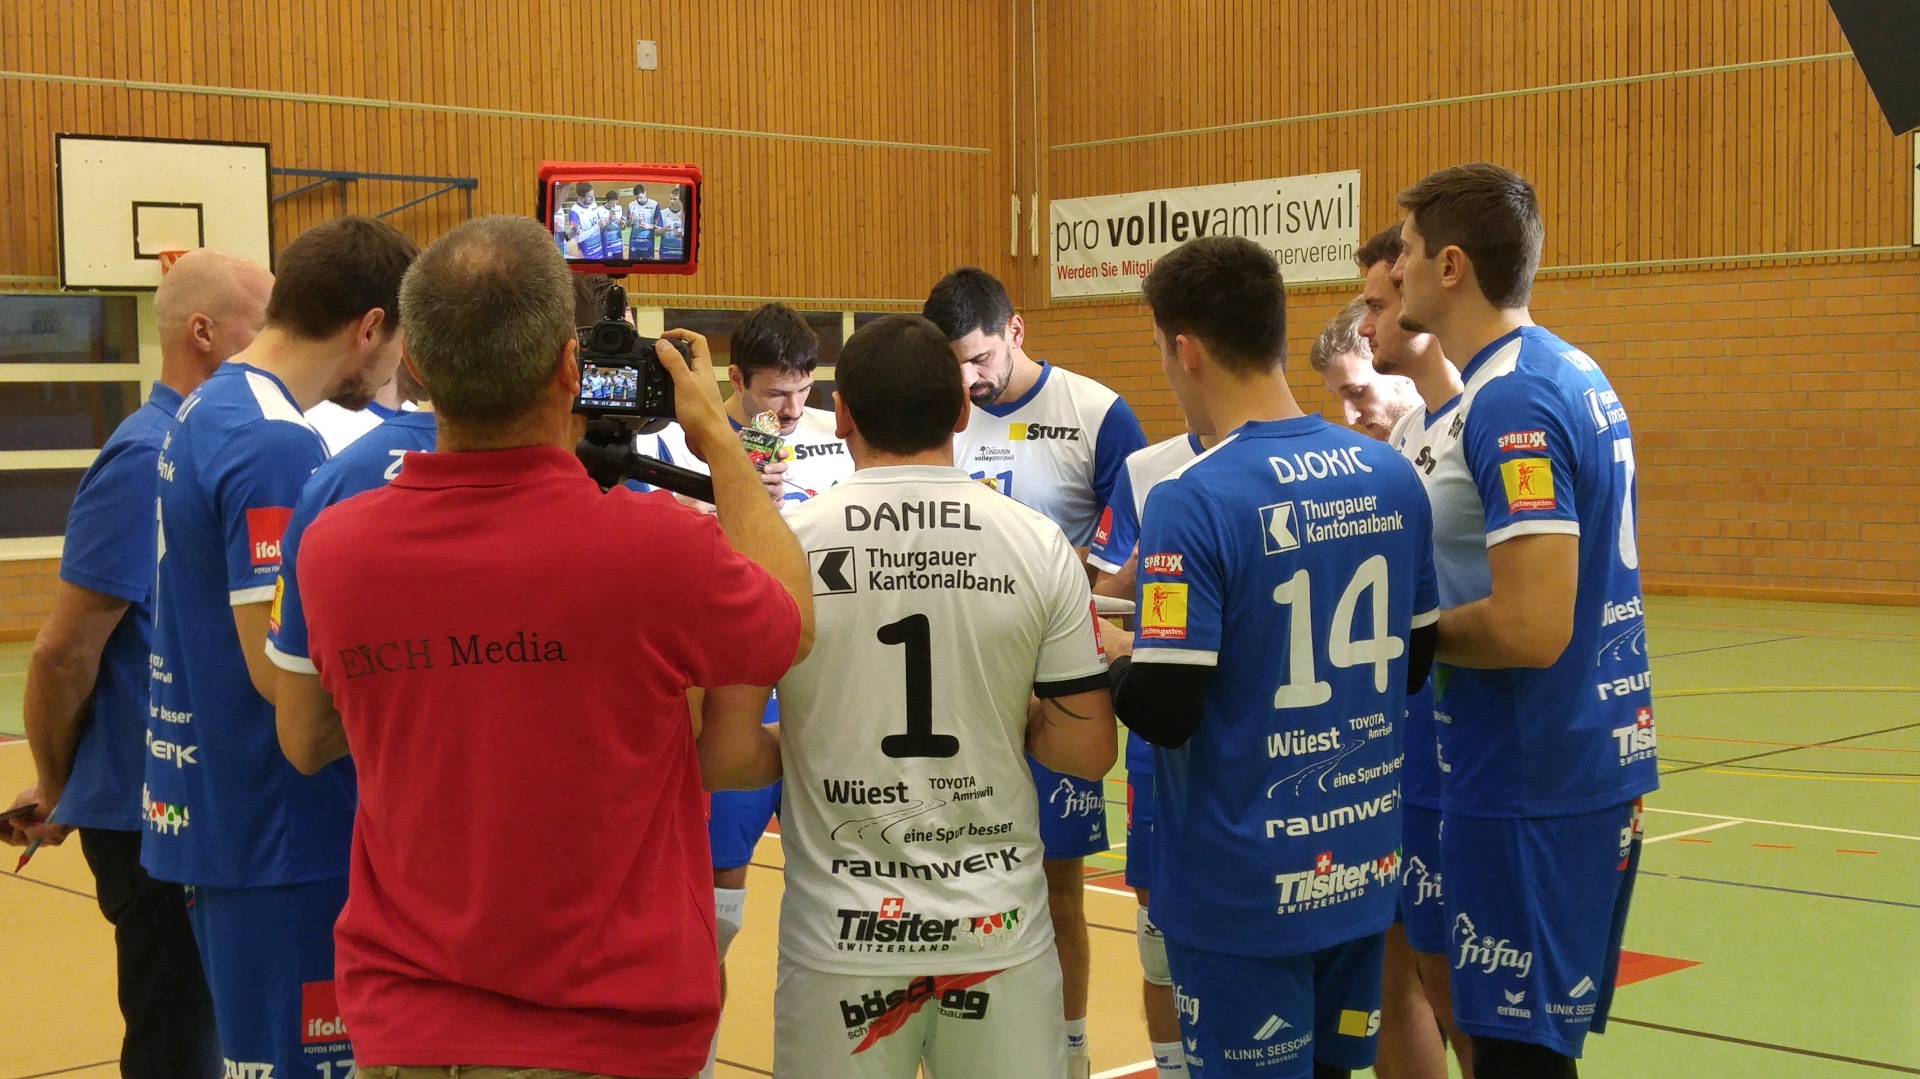 Volley Amriswil